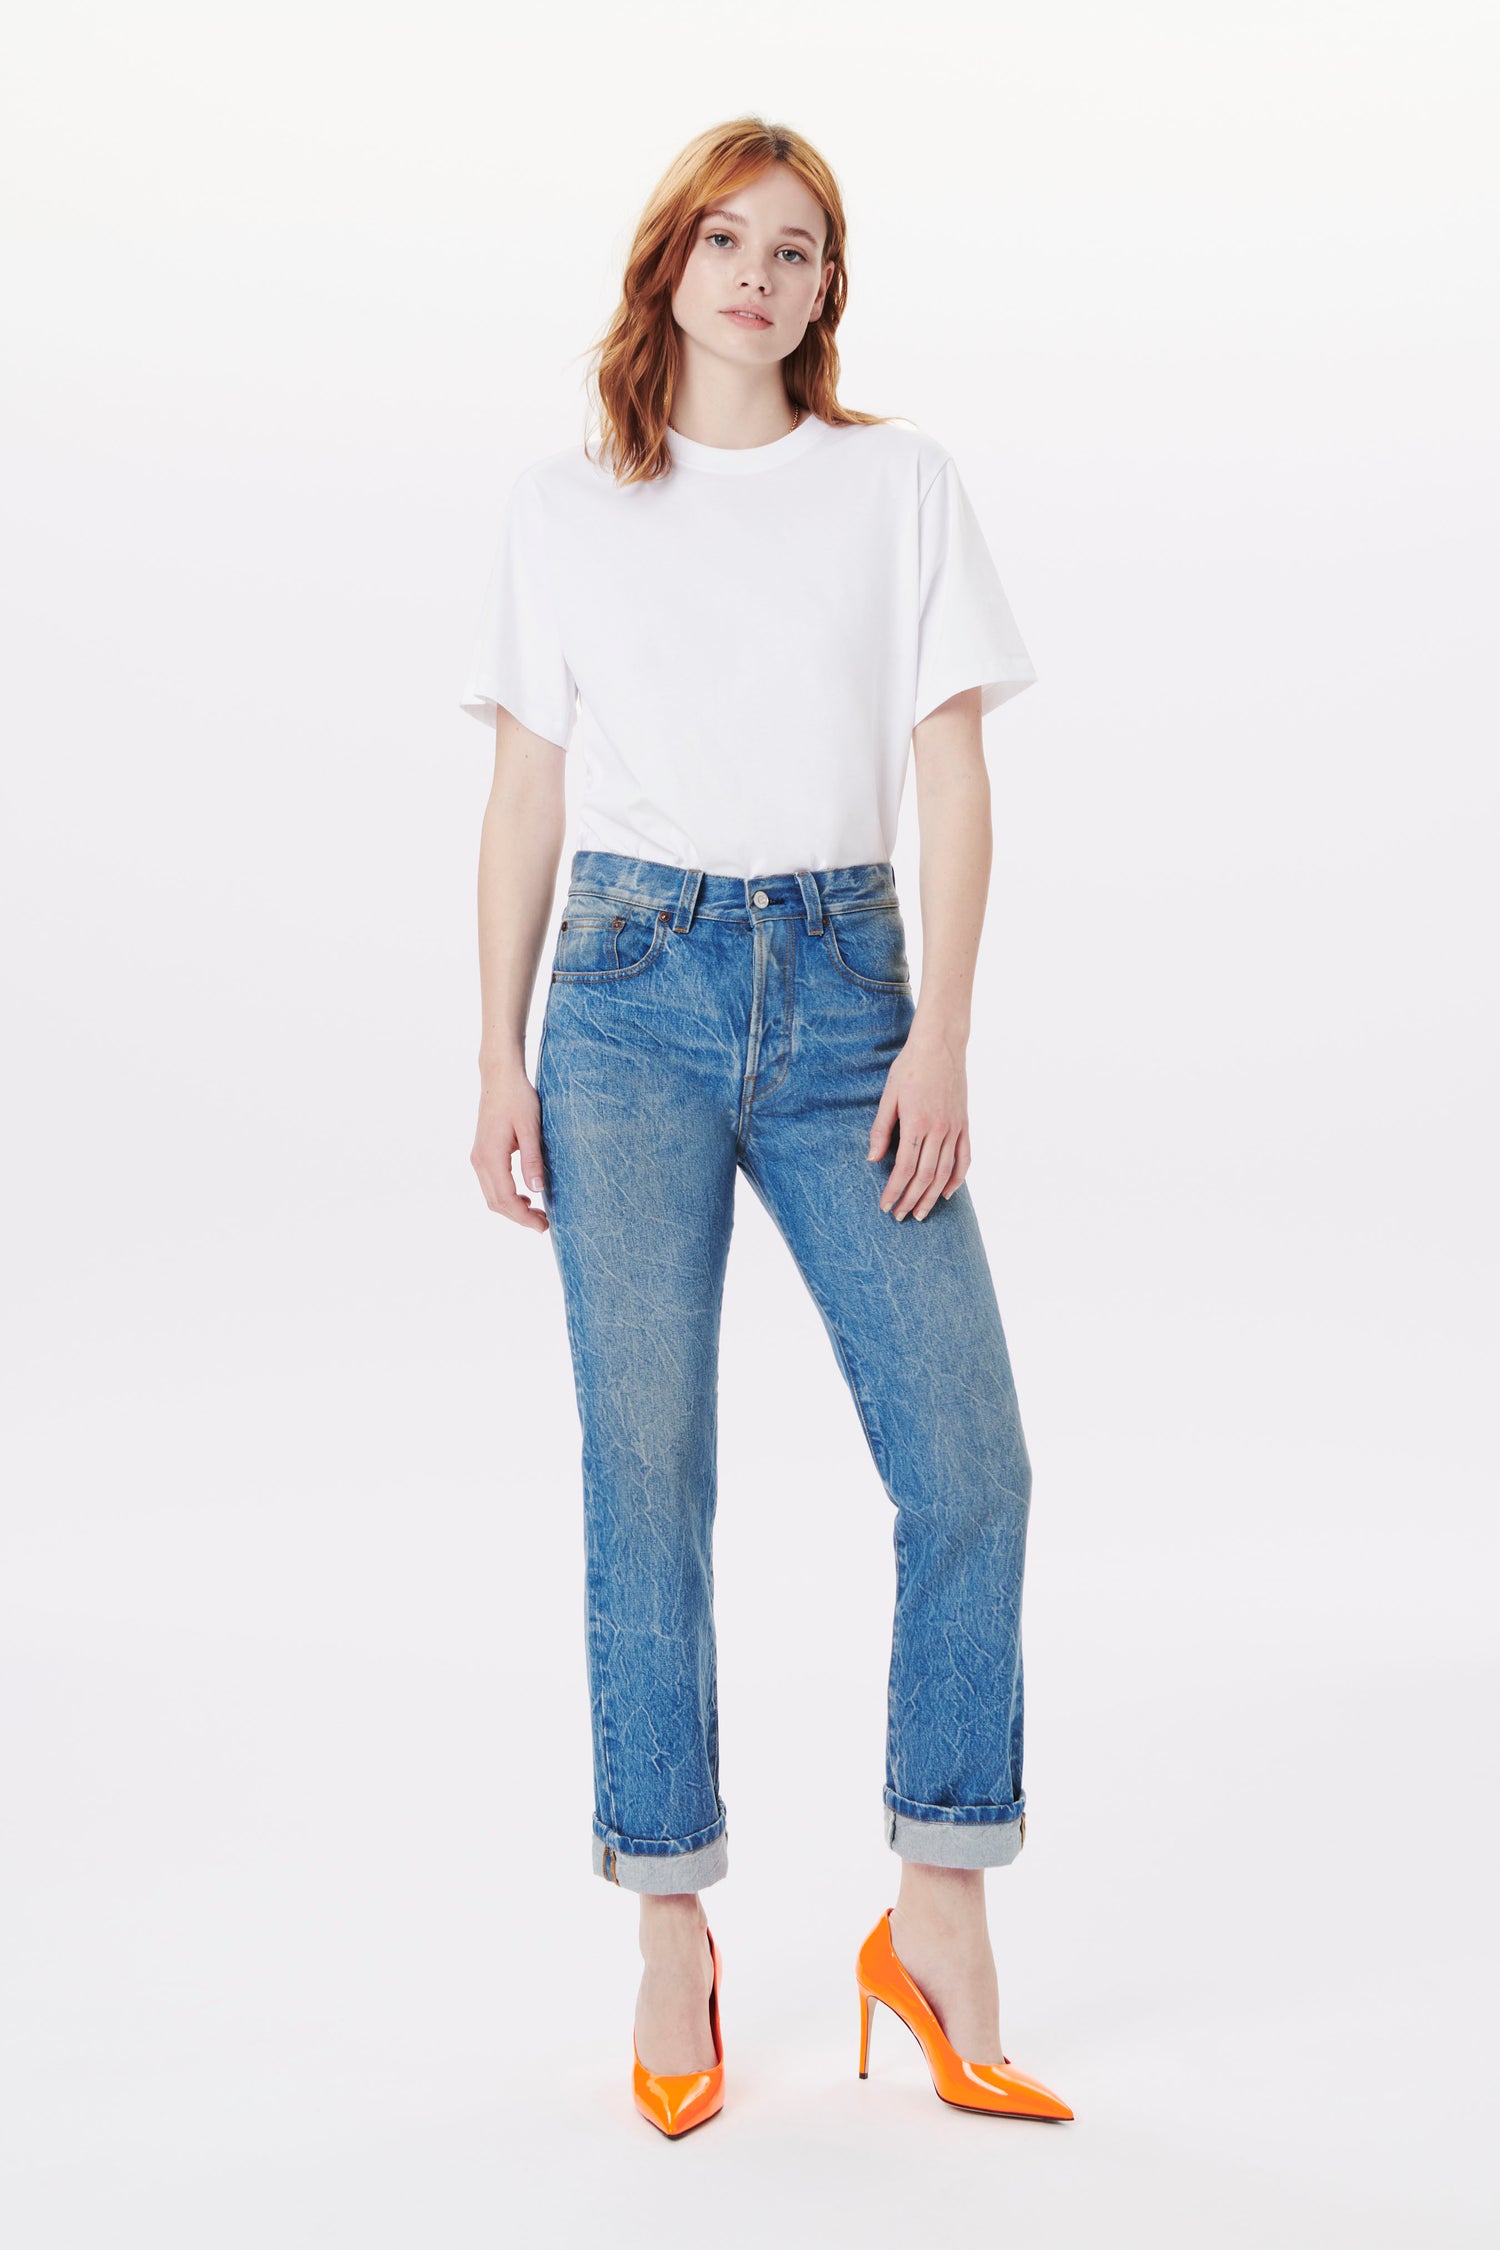 Structured Washed Denim Jeans - Women - Ready-to-Wear